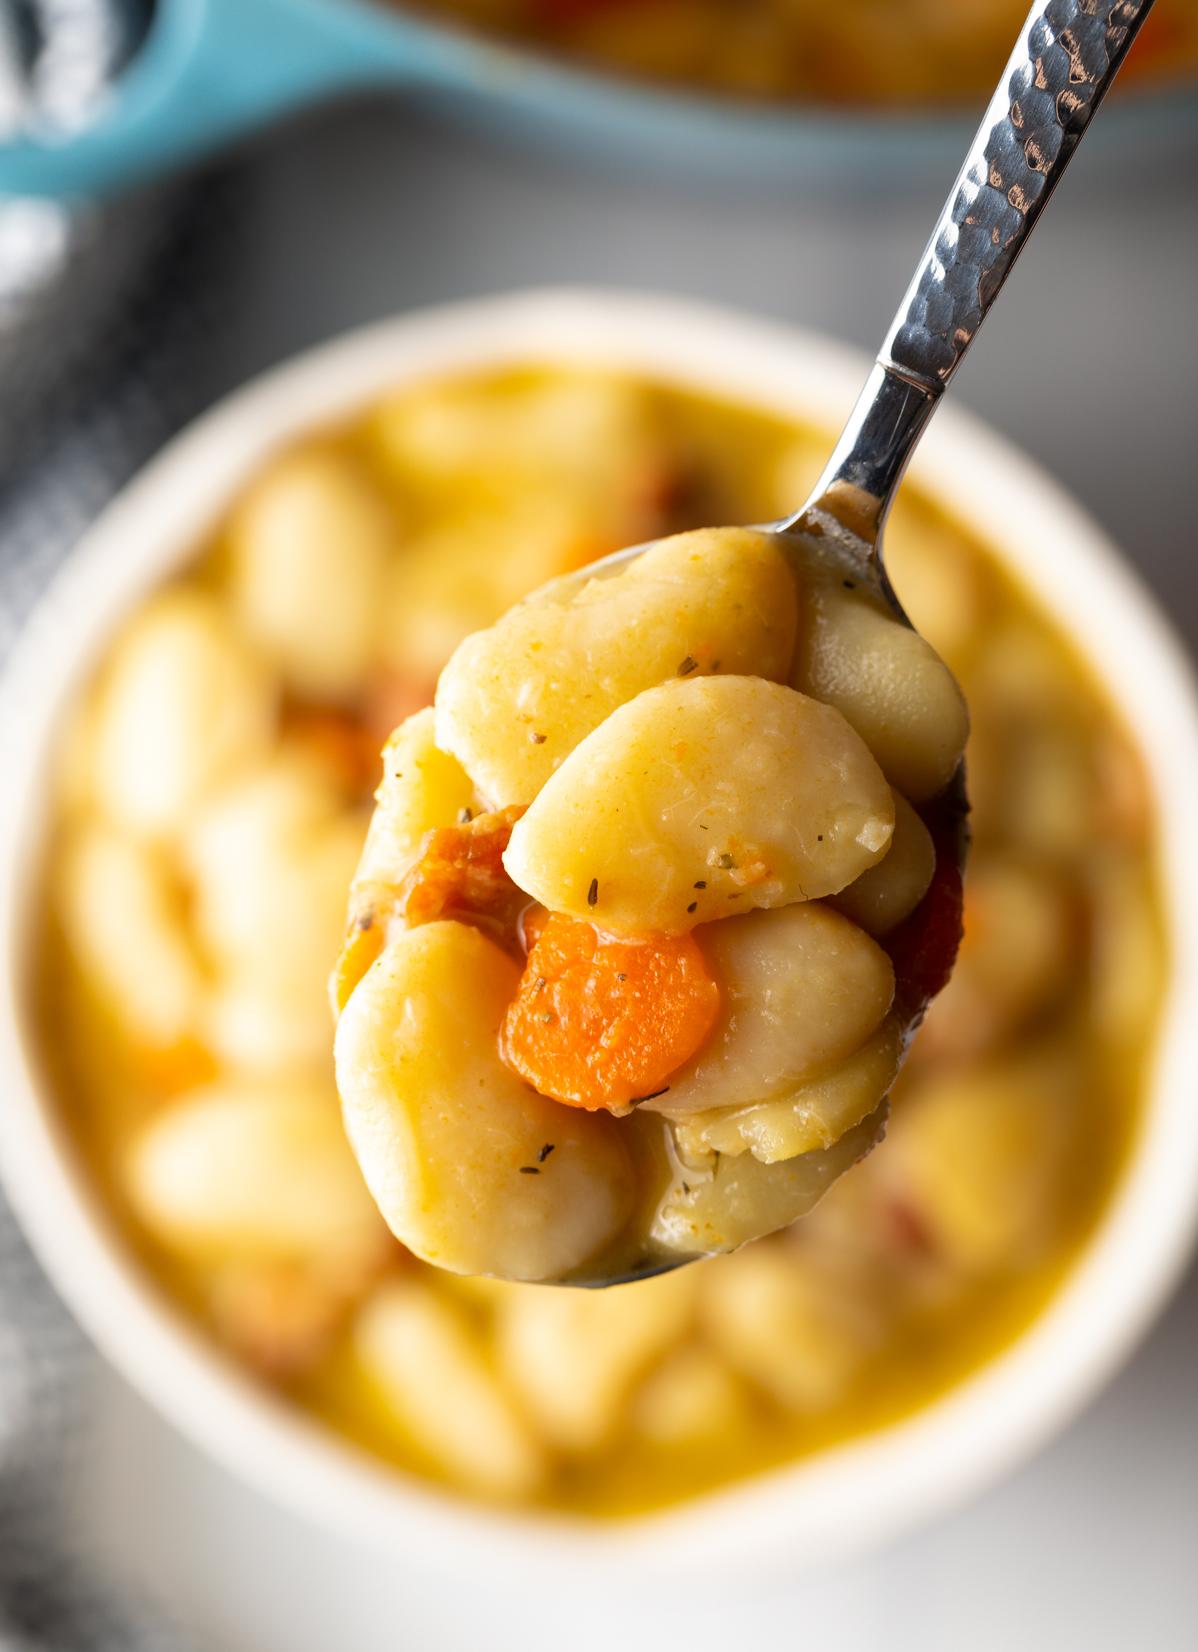  These butter beans are so tasty, you'll want to lick the crock pot clean!